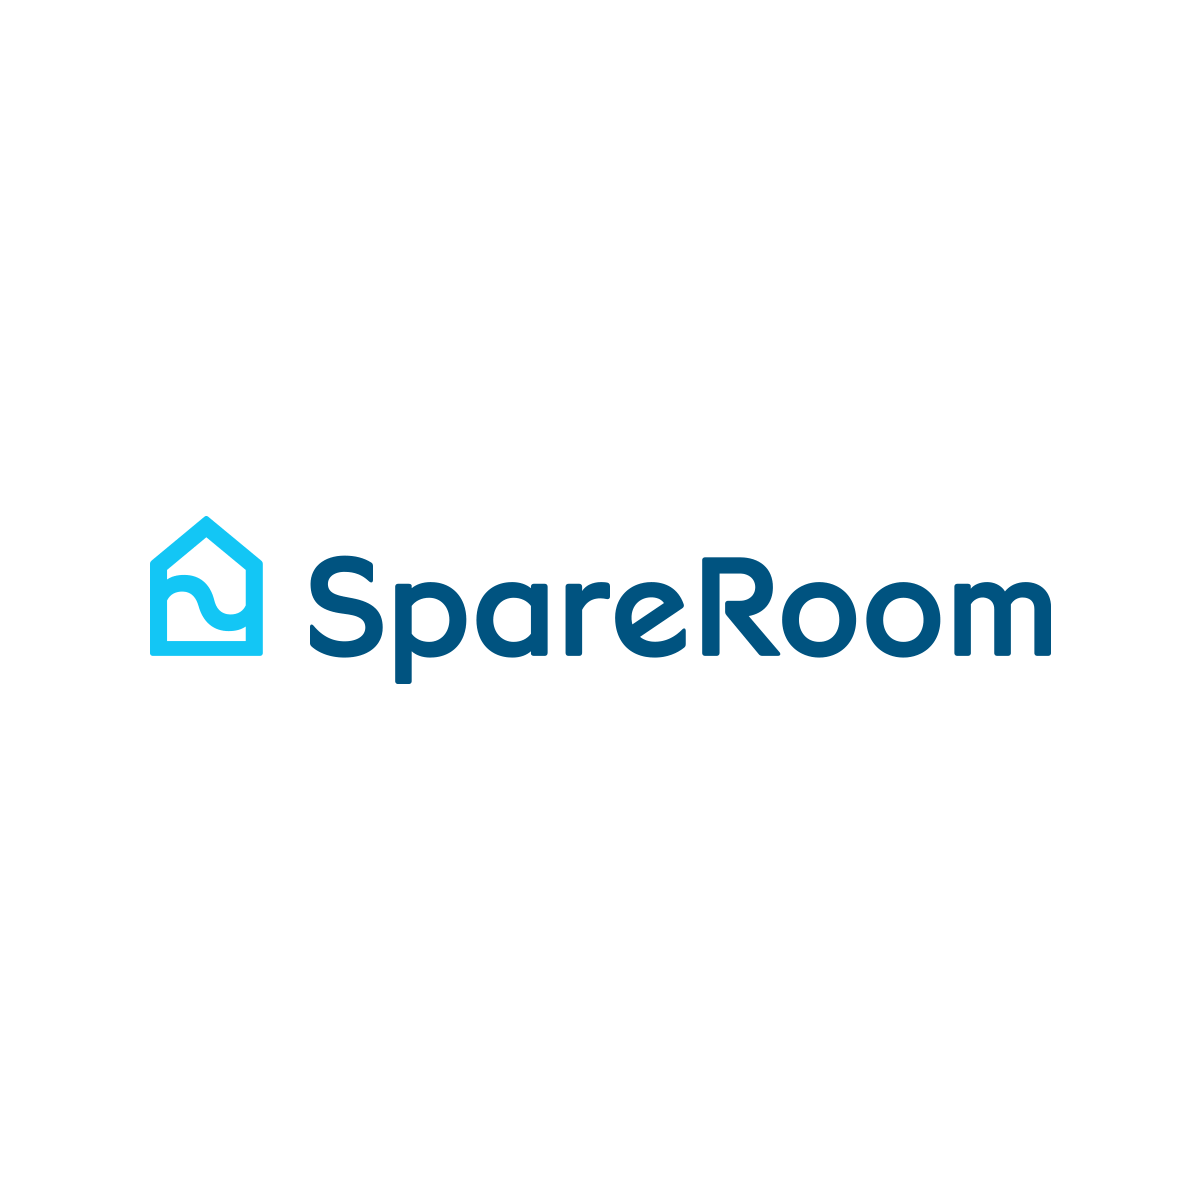 Bedroom Logo - SpareRoom for flatshare, house share, flat share & rooms for rent